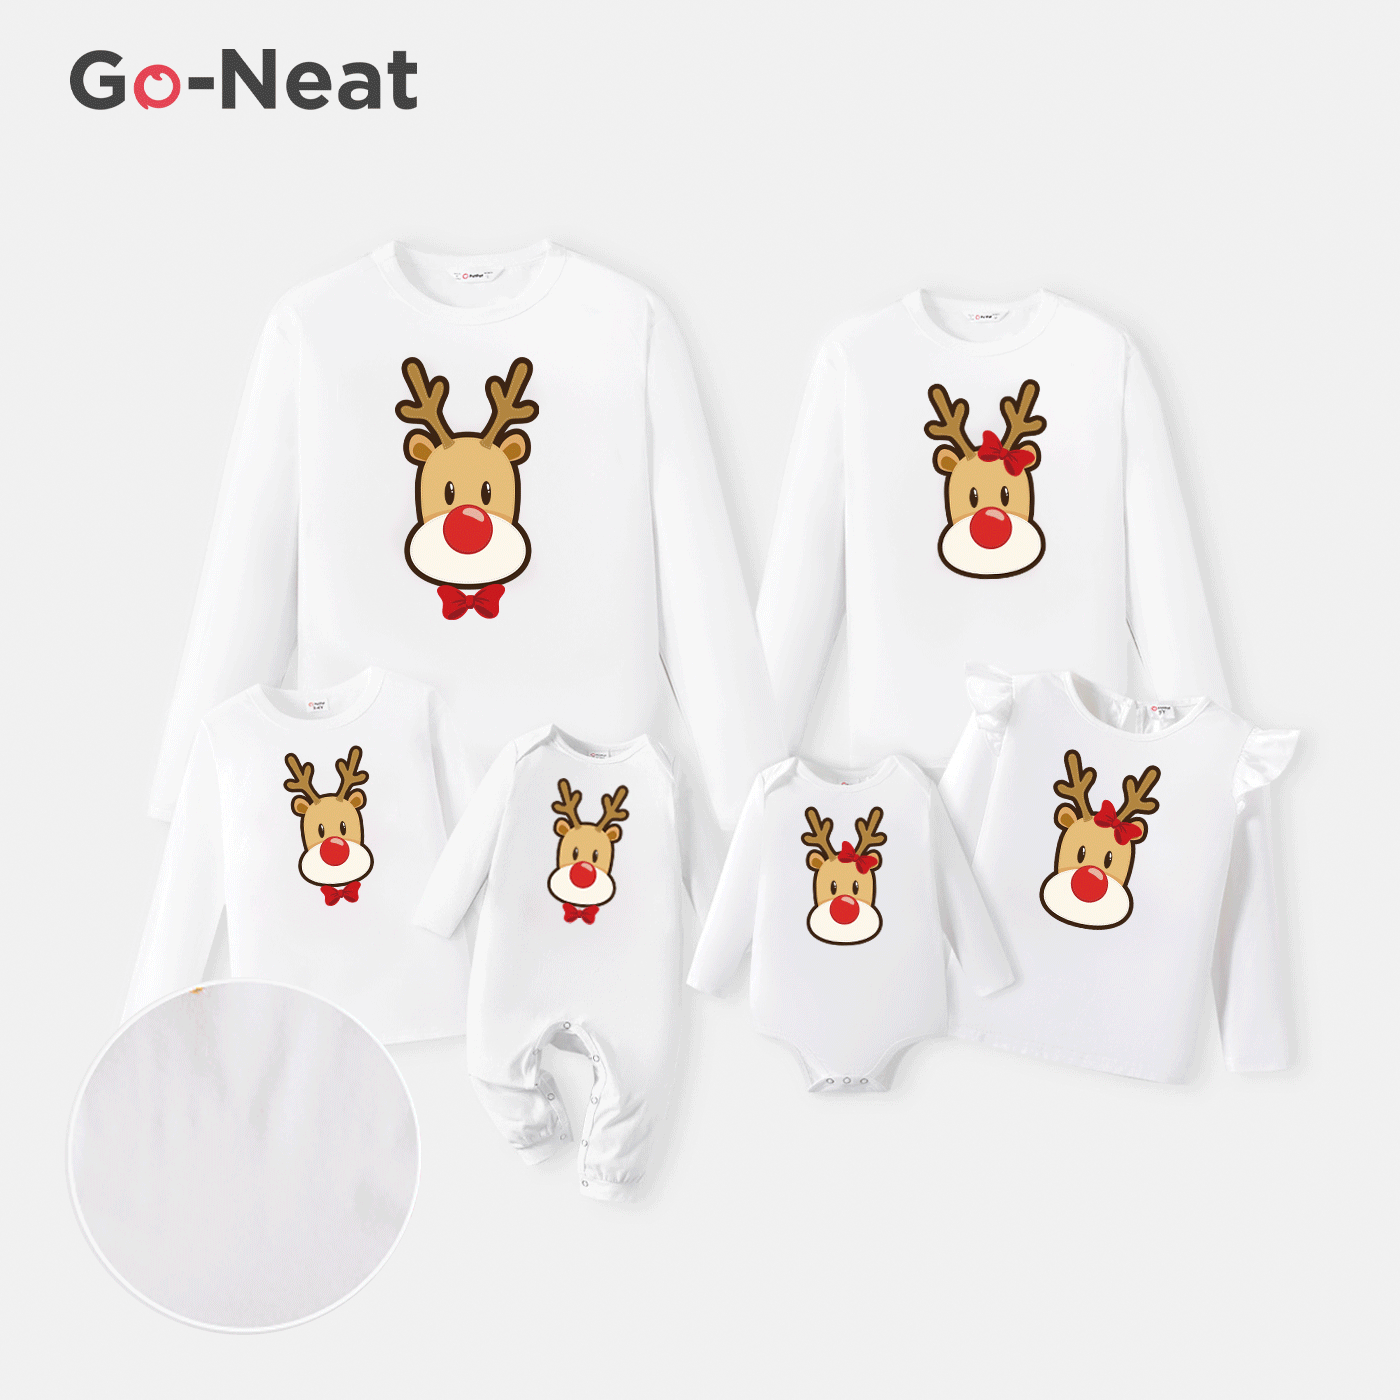 Go-Neat Water Repellent and Stain Resistant Christmas Family Matching Reindeer Print Long-sleeve Tee